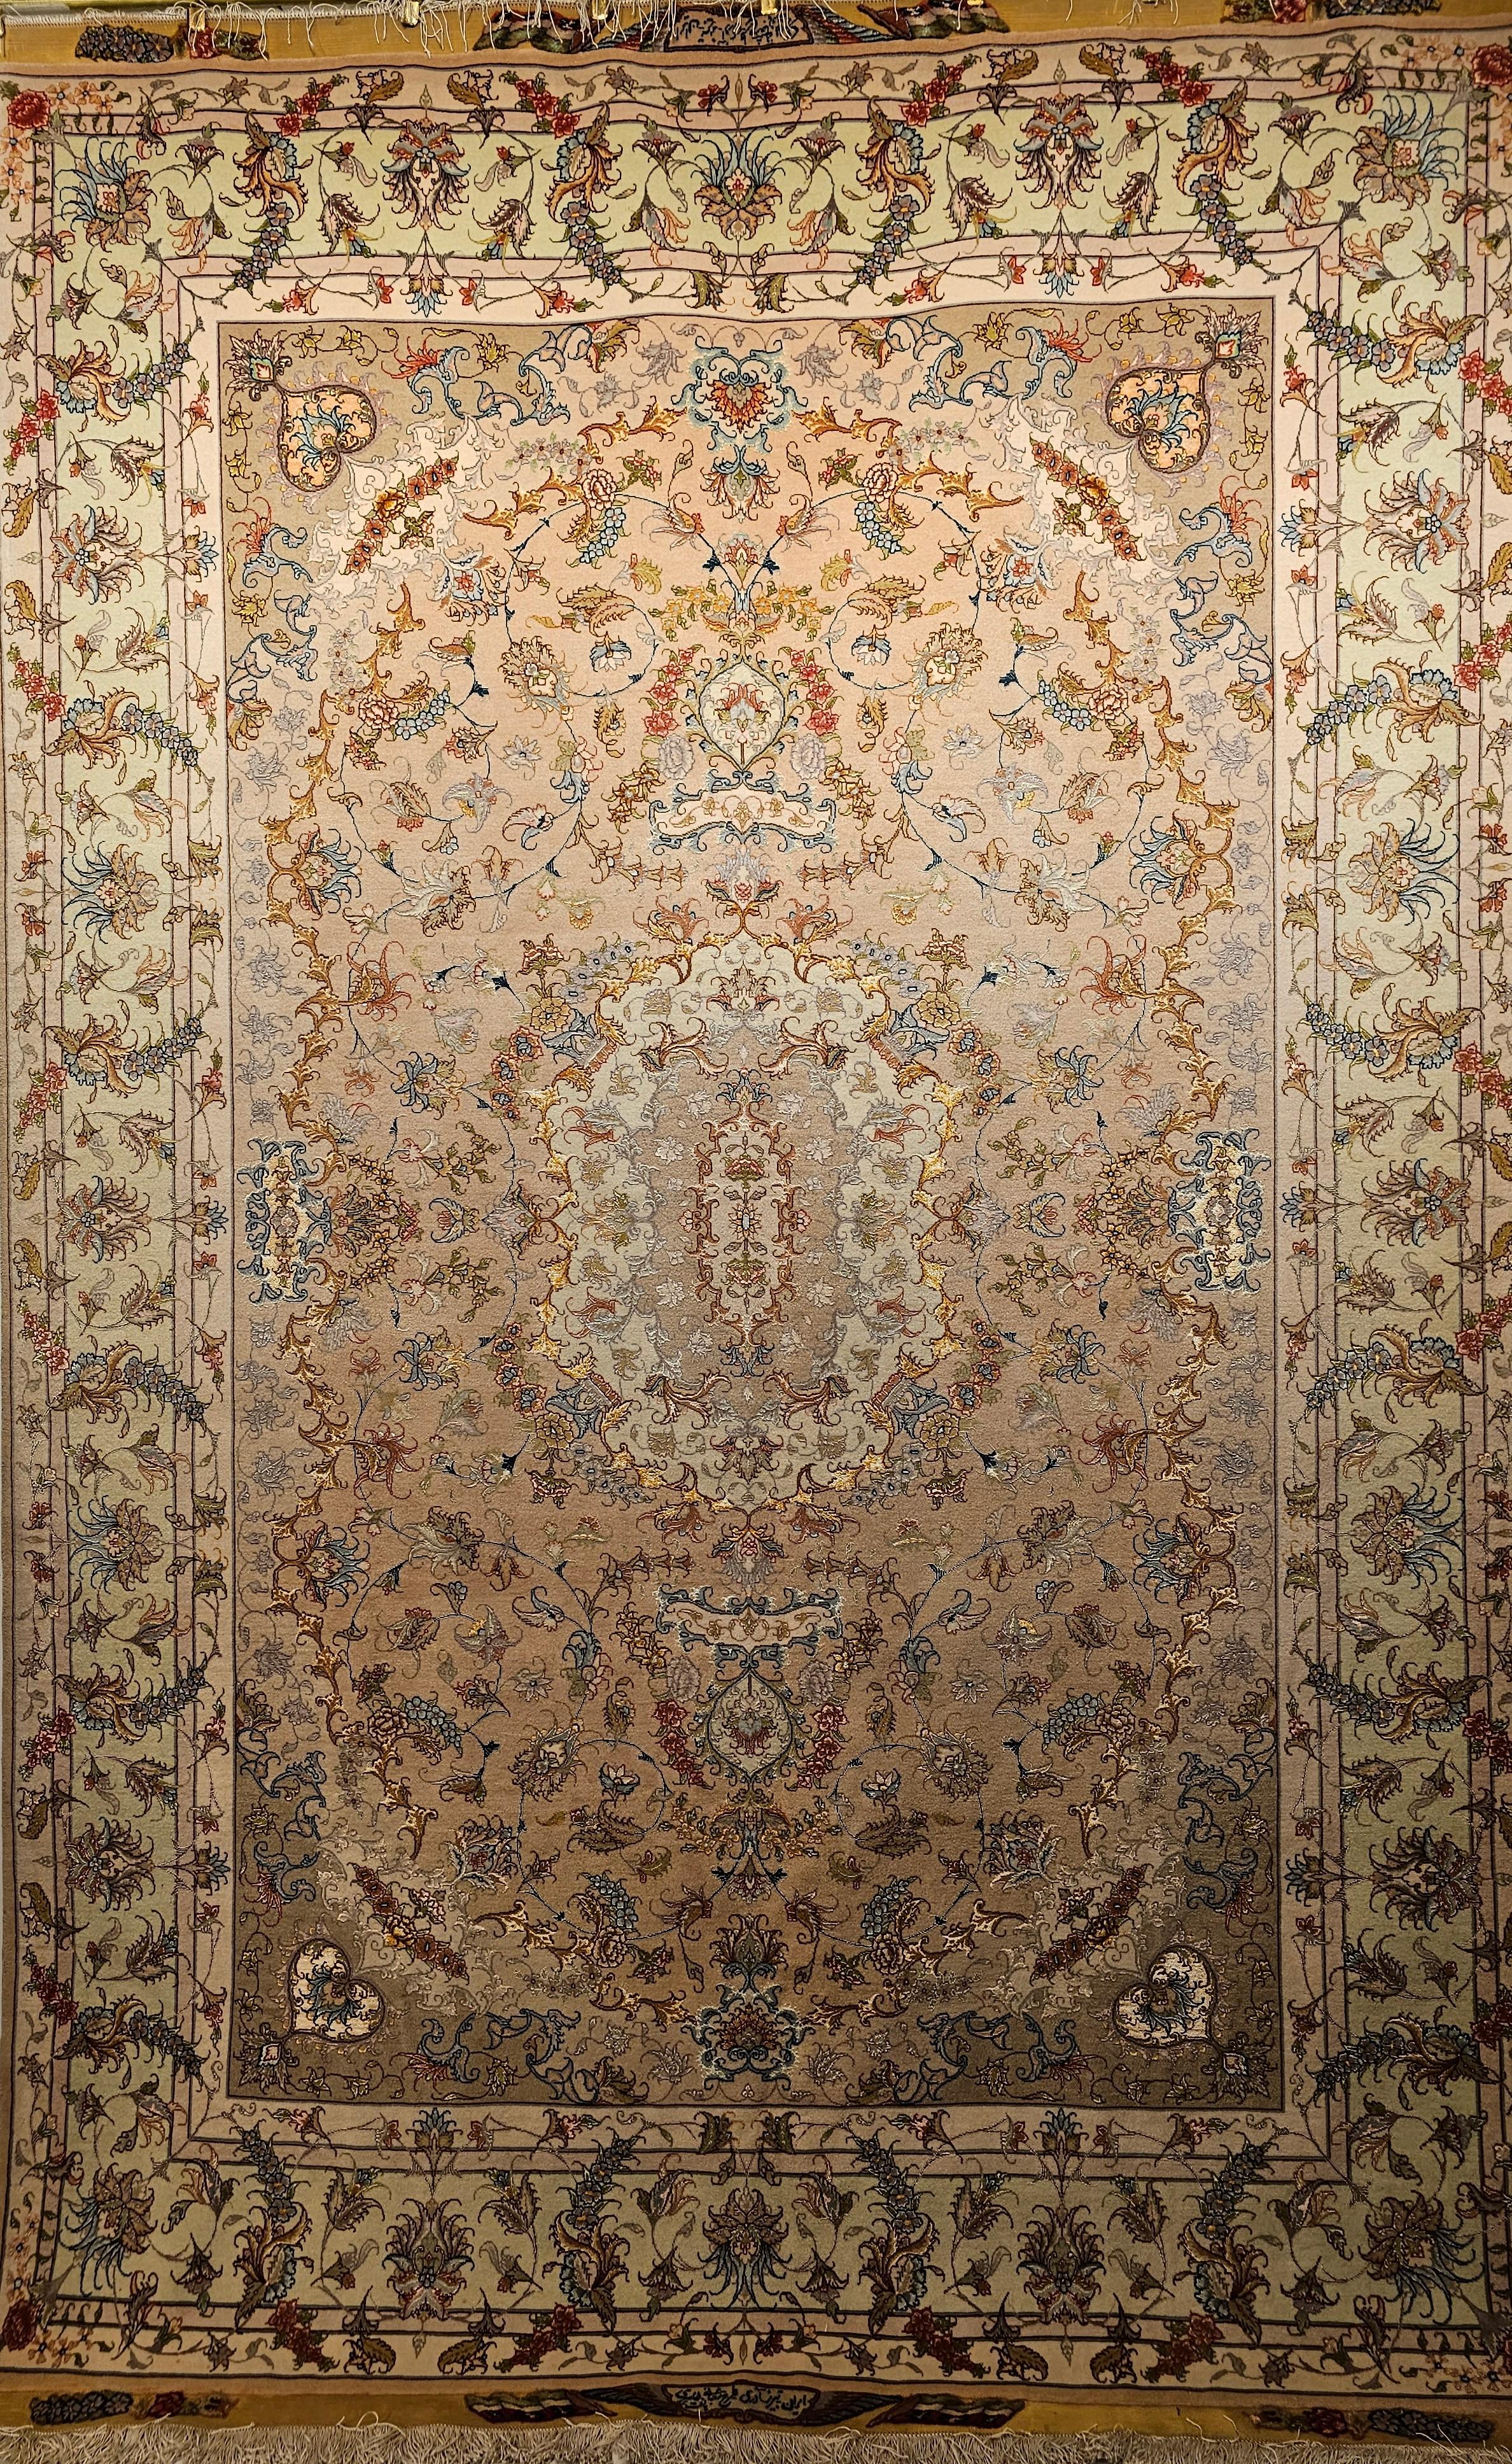 A beautiful and very fine and artfully hand woven authentic Persian Tabriz with a floral design with silk foundation.  This Tabriz room-size rug has a very fine design and weave.  It has a pale camelhair/taupe color field with a light green color